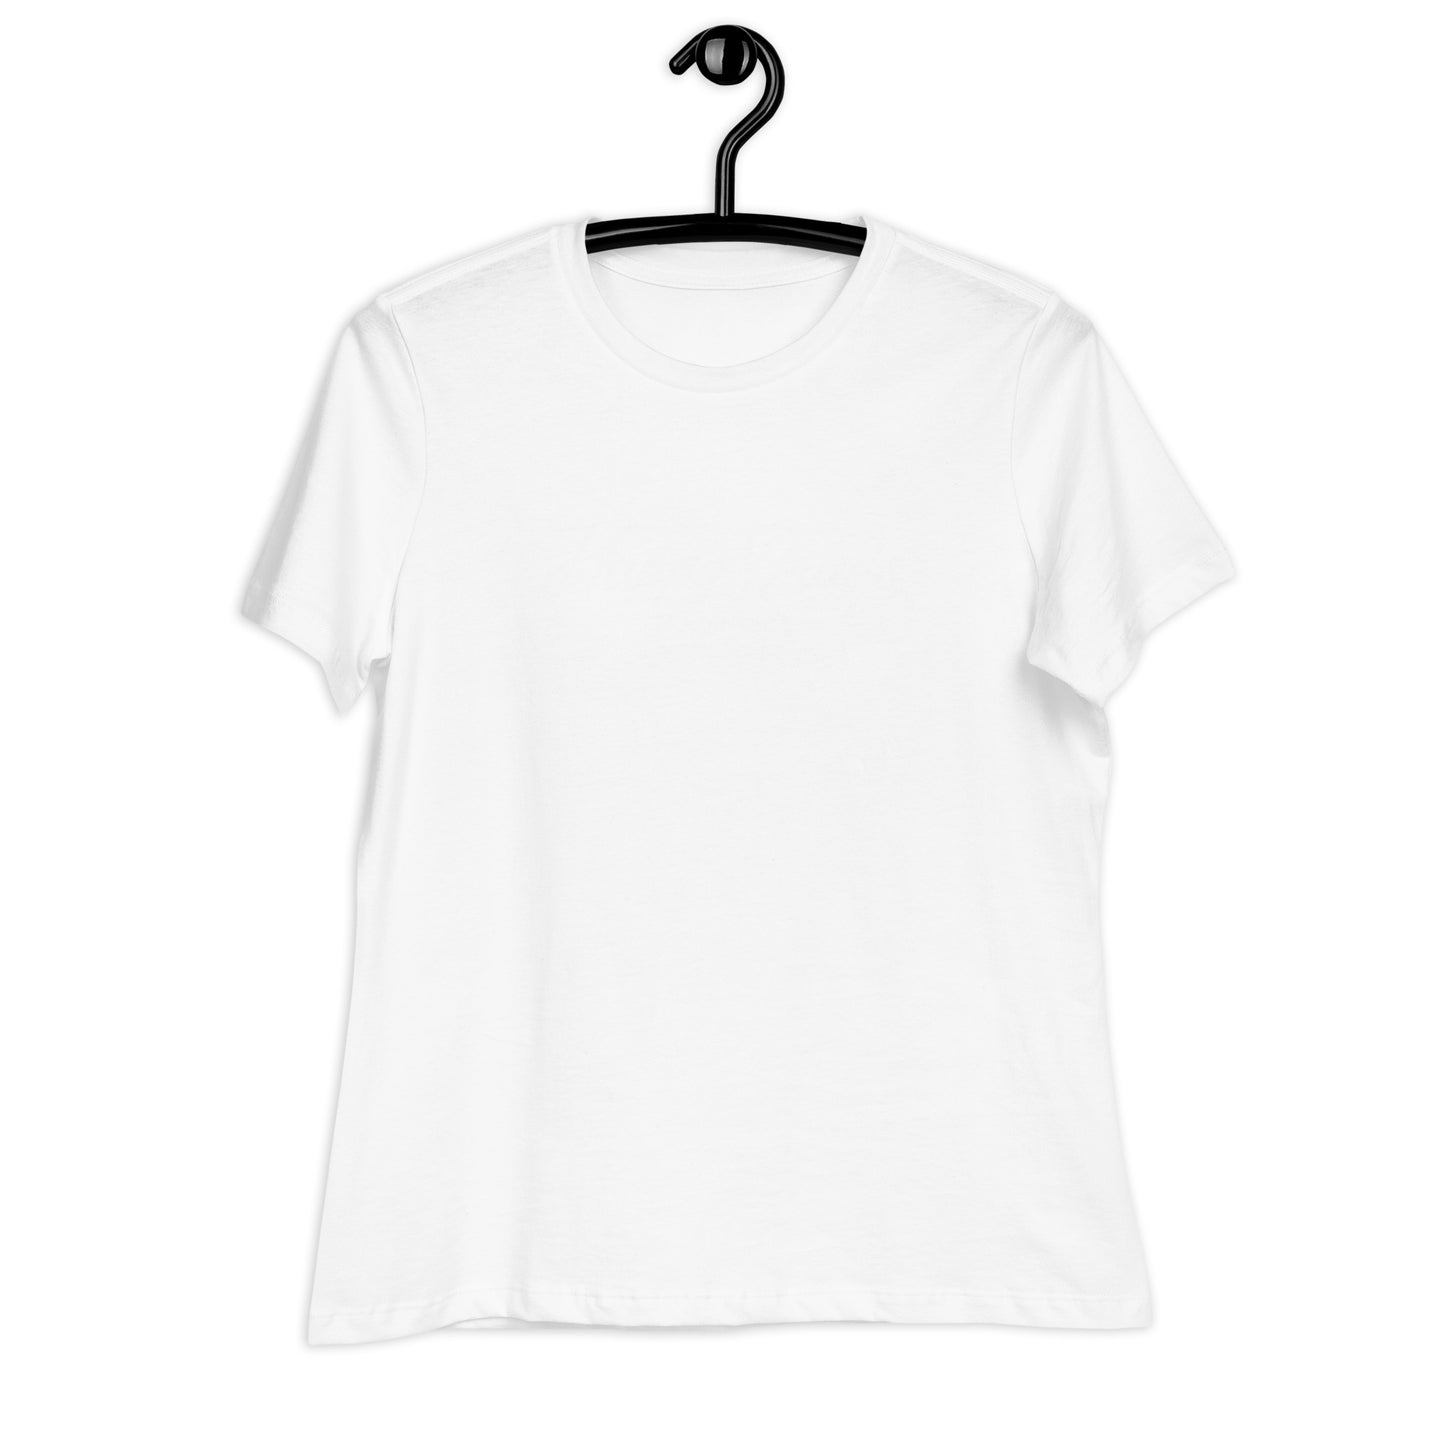 Happy Trails Classic Logo Tee - Women's Relaxed T-Shirt